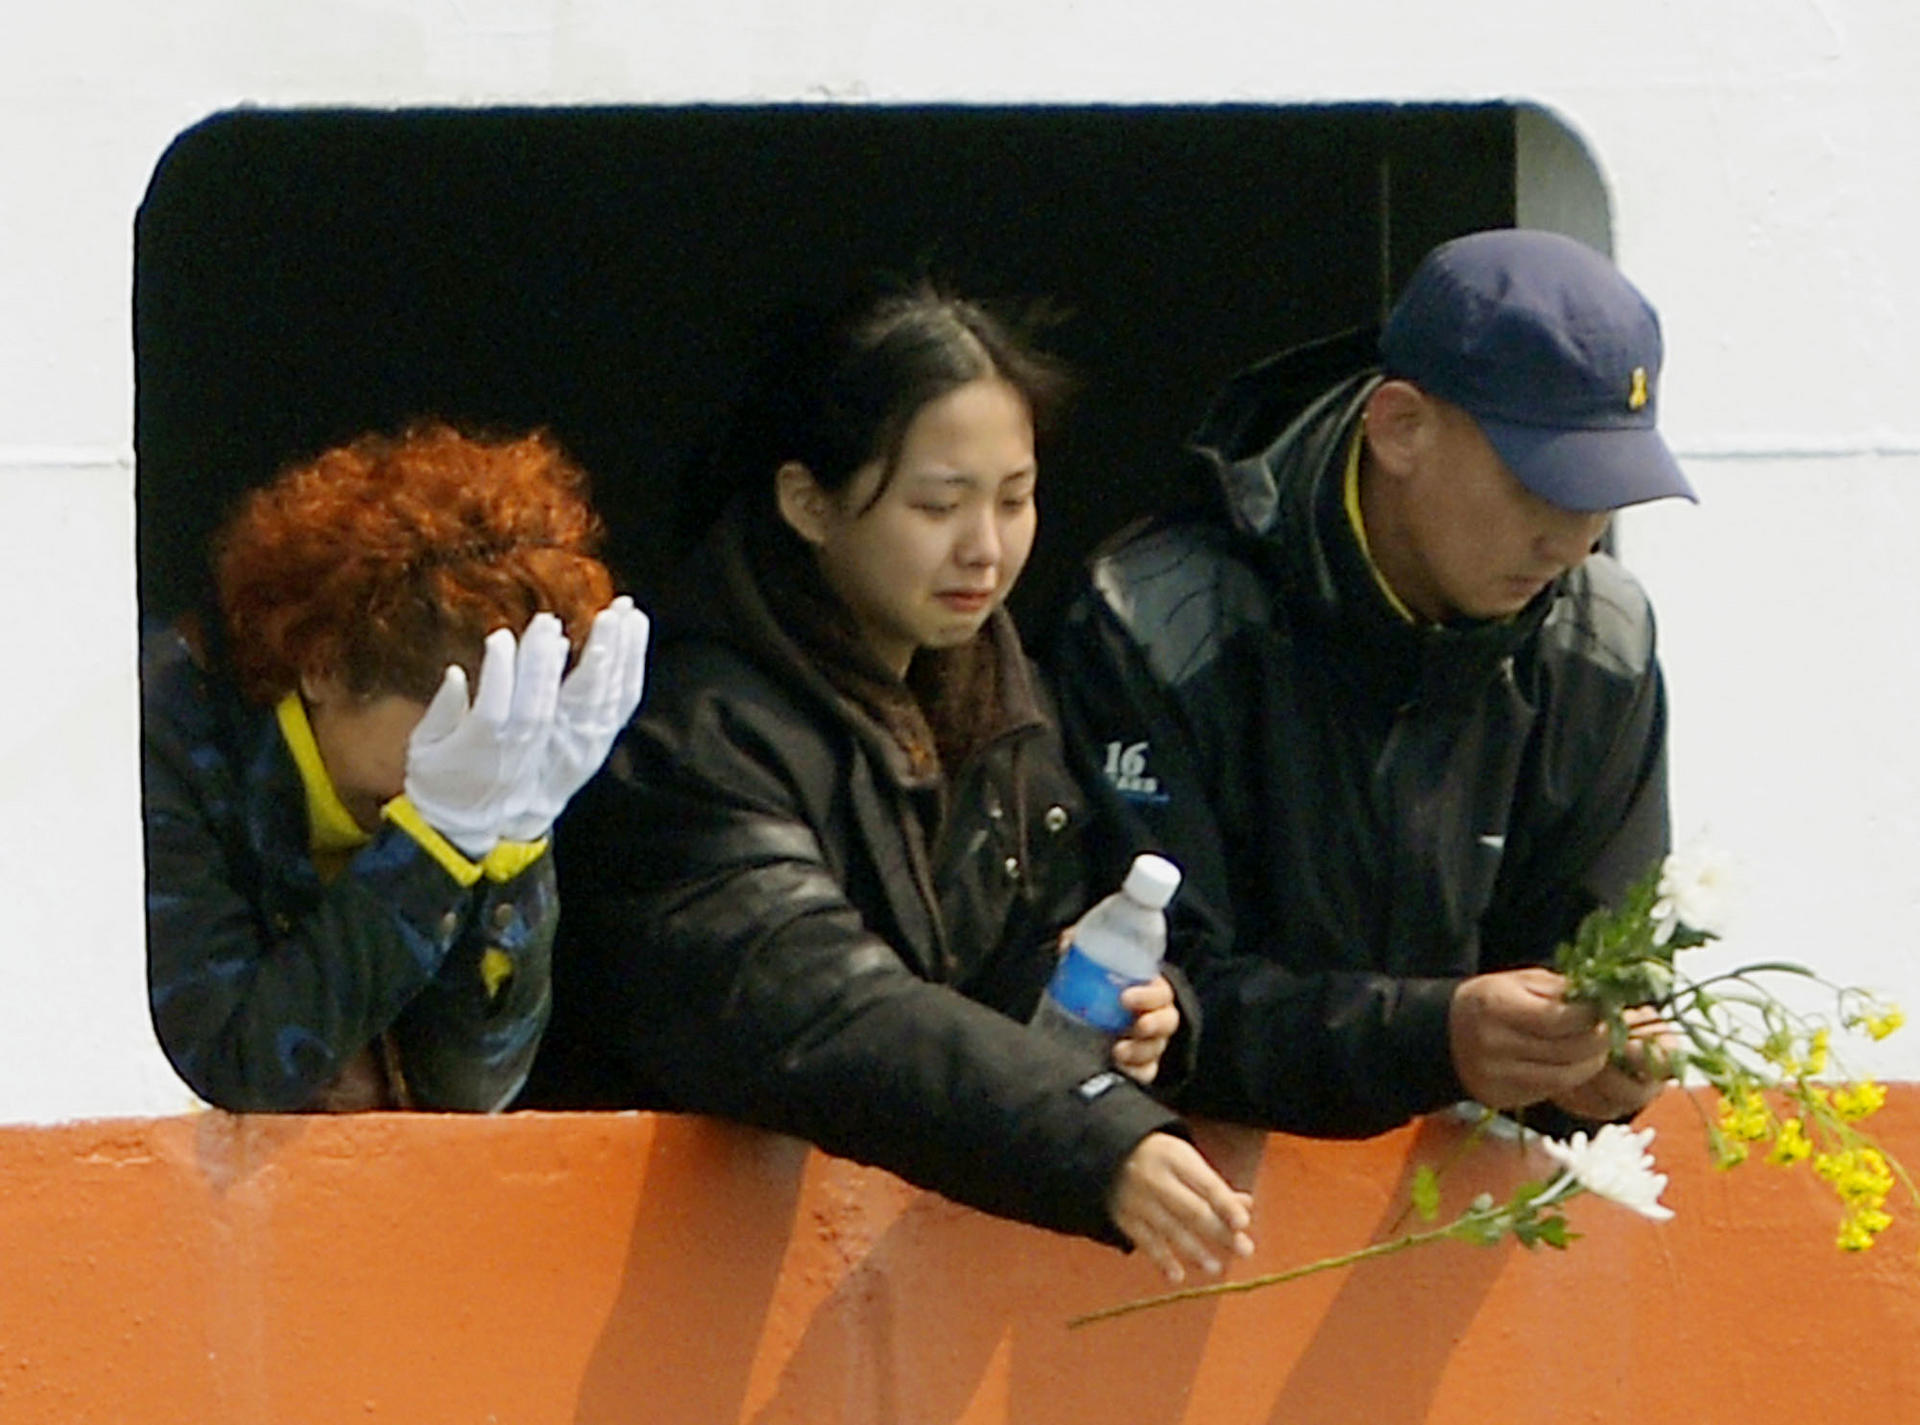 Relatives weep and offer flowers at the accident site. Photo: Kyodo